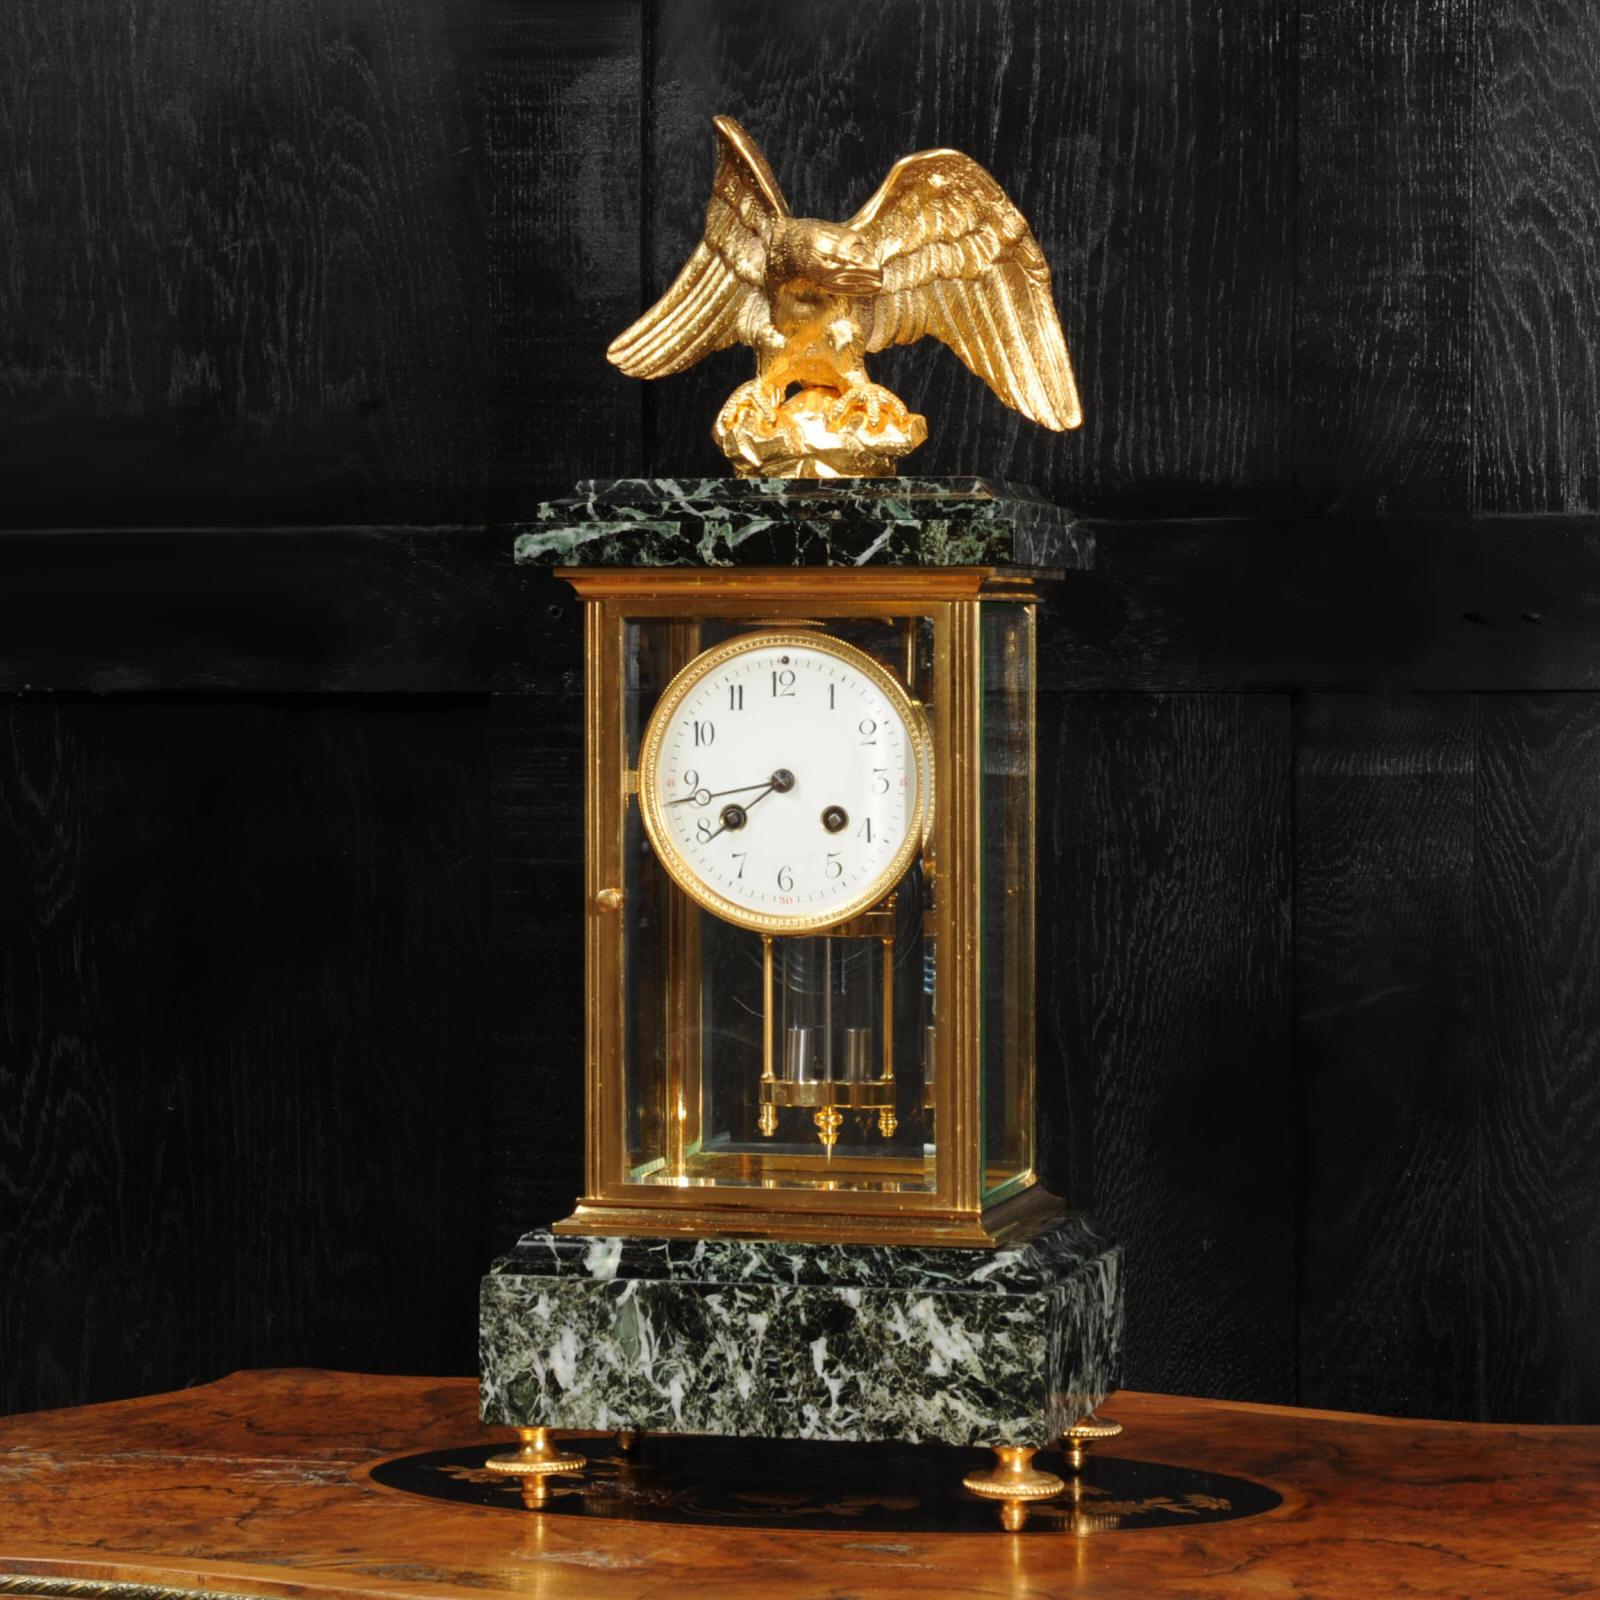 A stunning original antique French clock by the illustrious maker Charles Hour, circa 1890. It is of the beautifully restrained Empire design in a sumptuous green variegated specimen marble and ormolu (finely gilded bronze). To the top is a